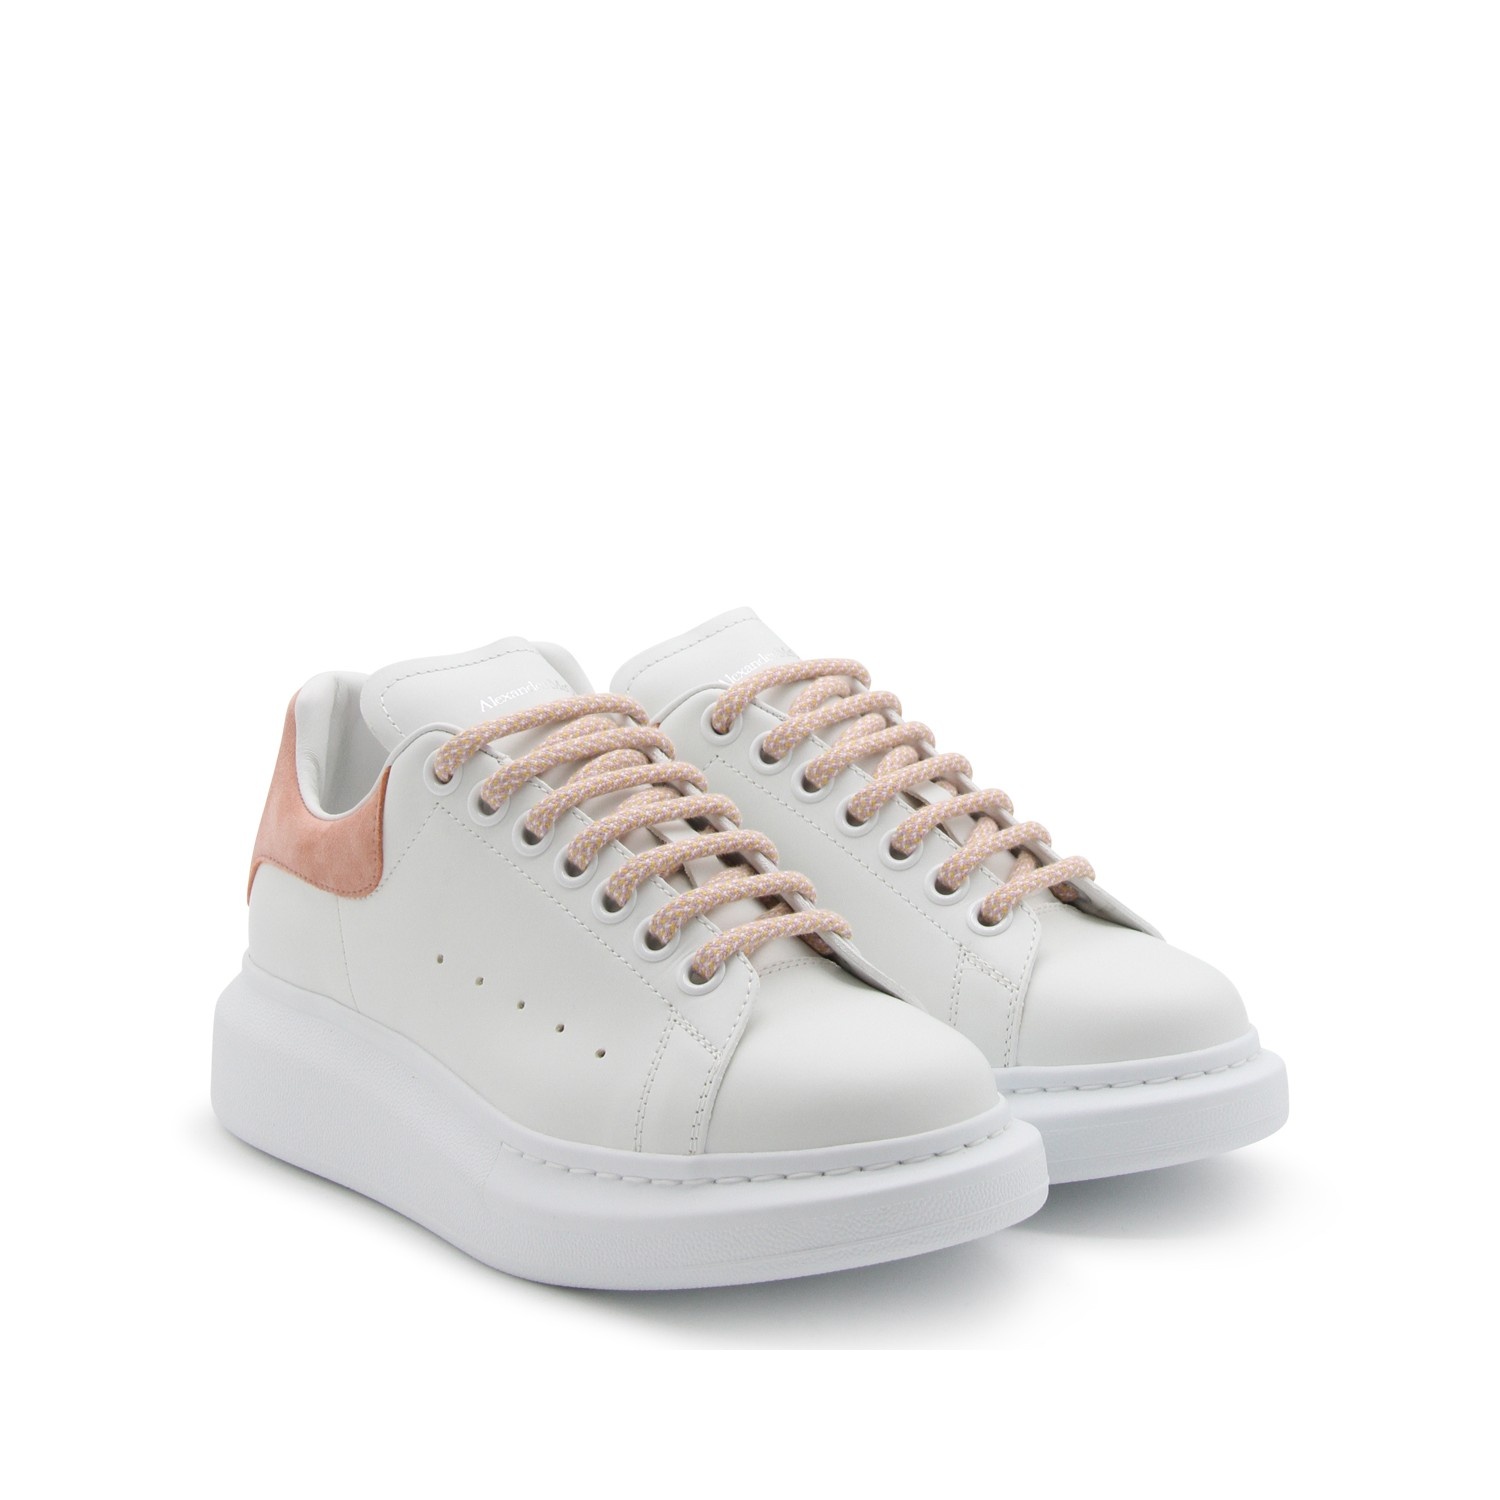 WHITE LEATHER AND PINK SUEDE OVERSIZED SNEAKERS - 5